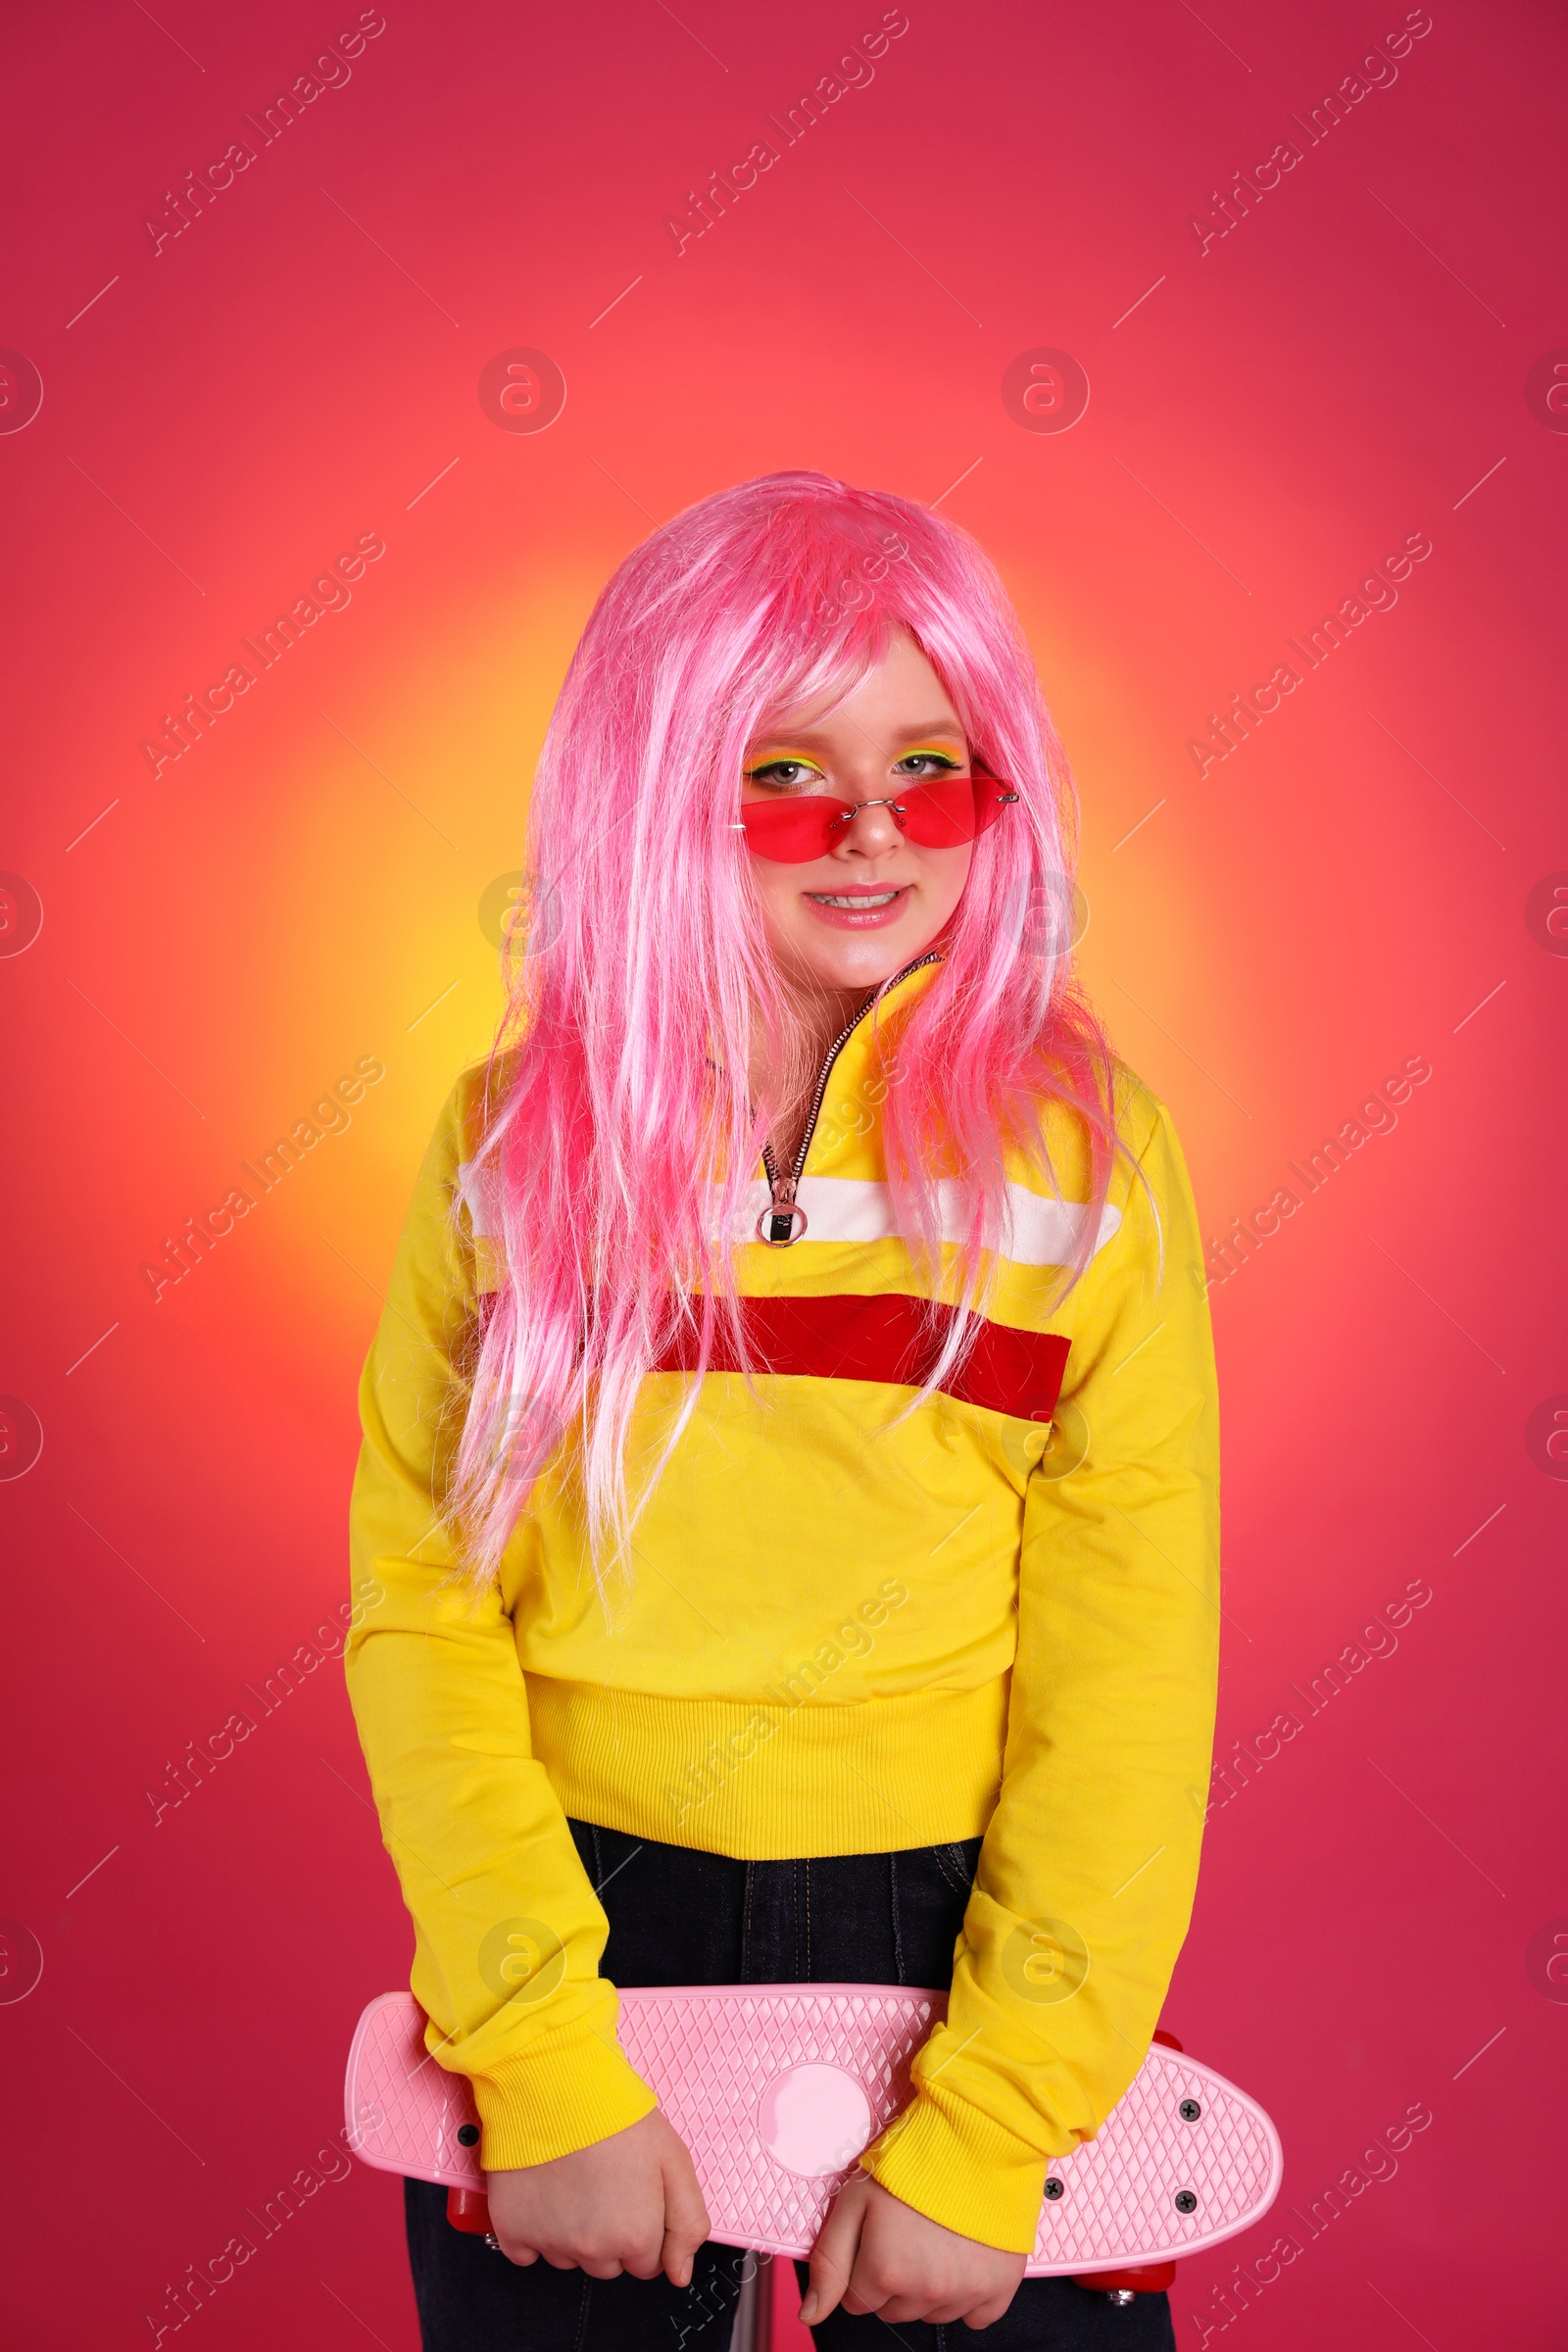 Photo of Cute indie girl with sunglasses and penny board on bright pink background